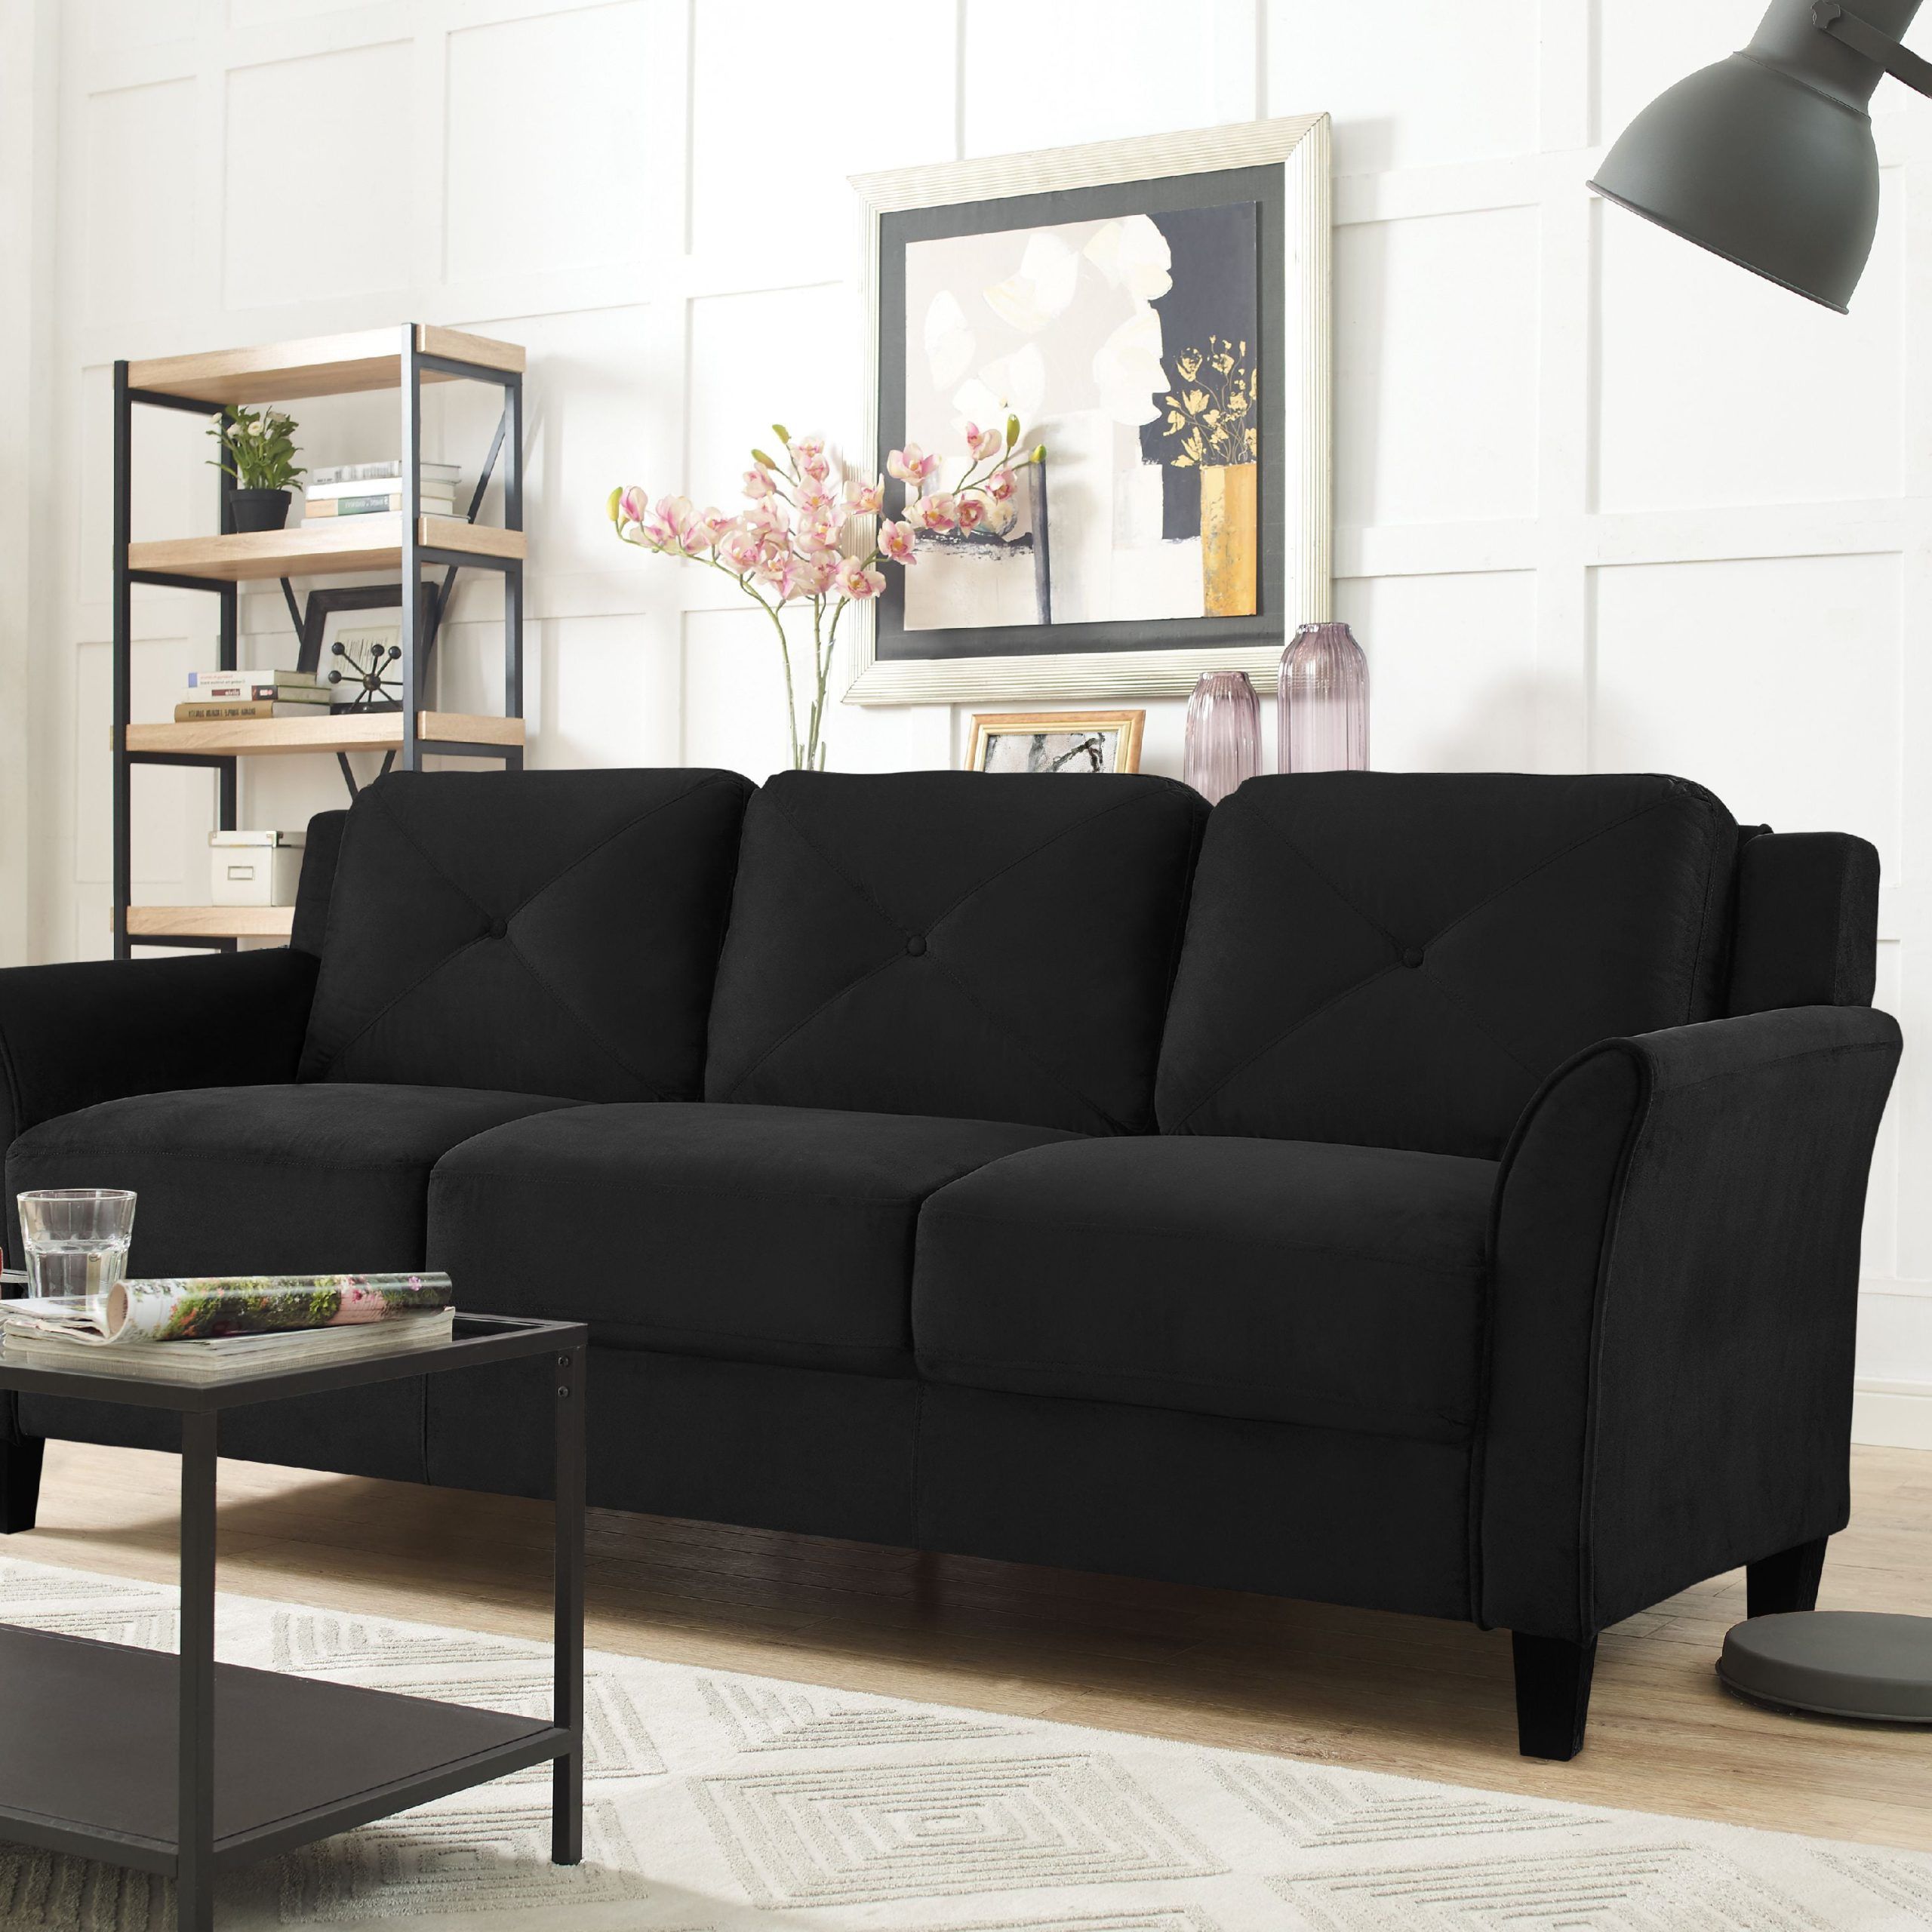 Popular Lifestyle Solutions Taryn Curved Arm Fabric Sofa, Black – Walmart Inside Sofas In Black (View 10 of 15)